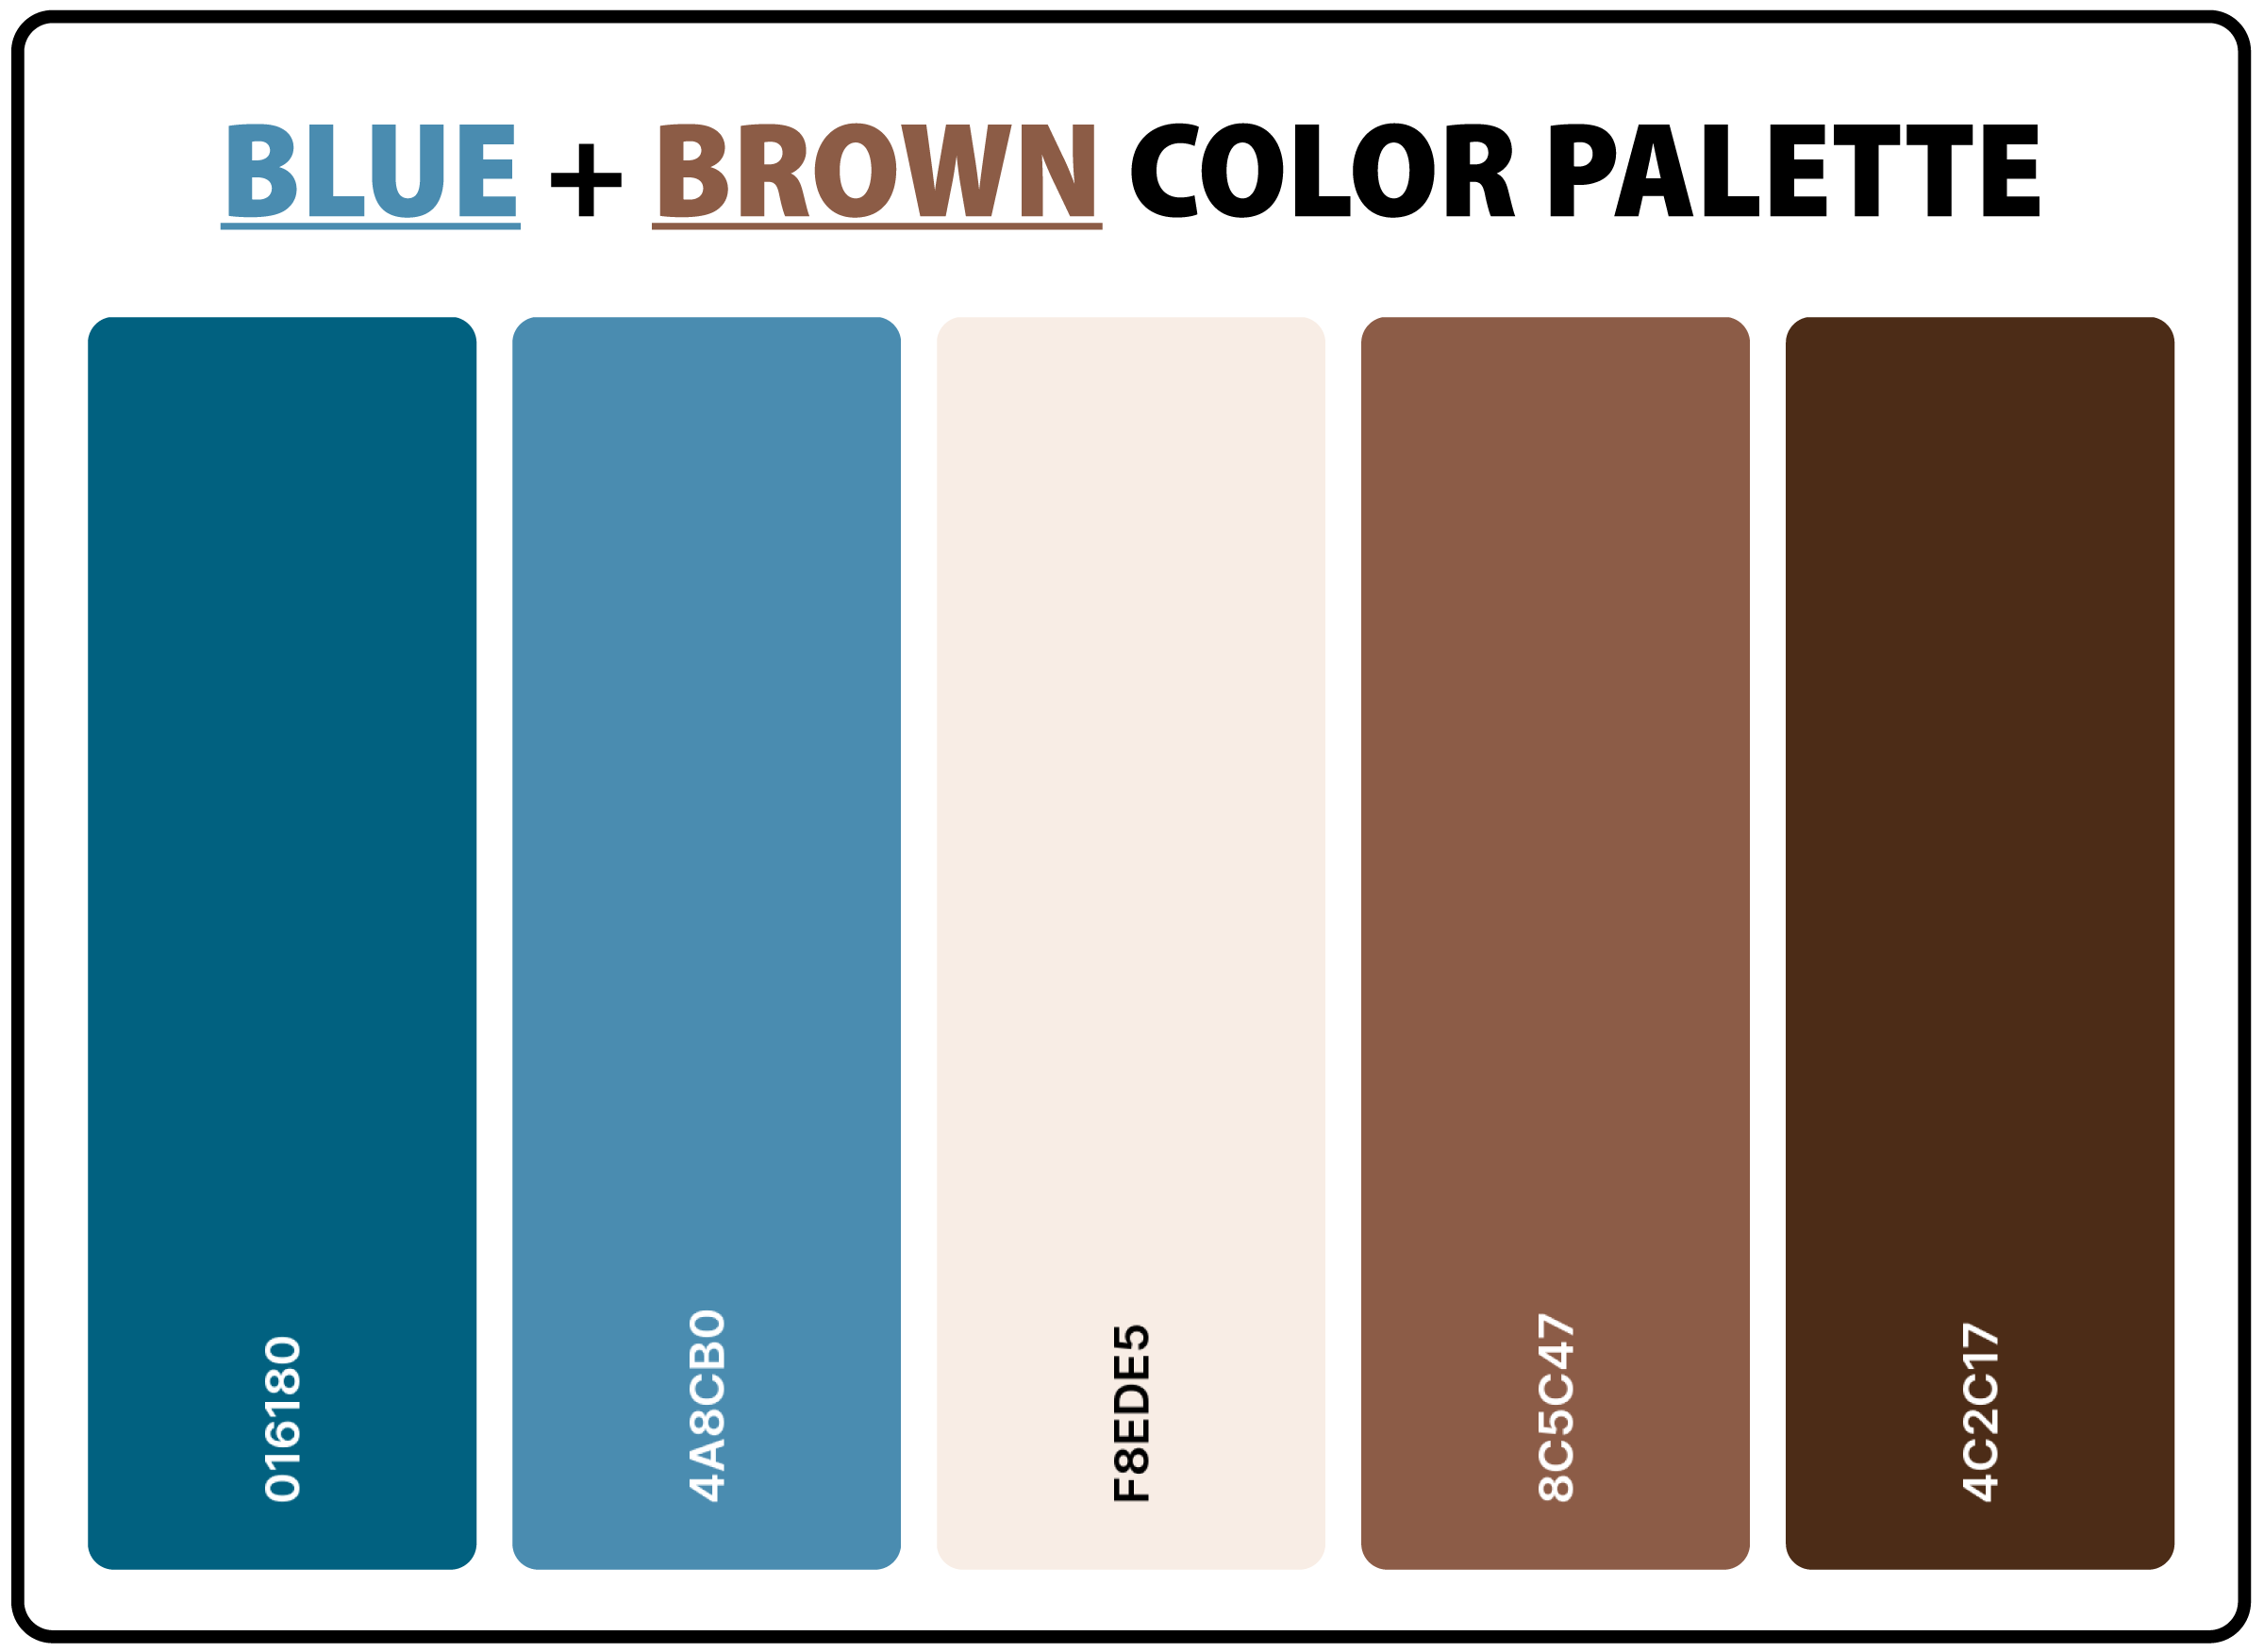 Blue-and-Brown-Color-Palette-with-Hex-Codes